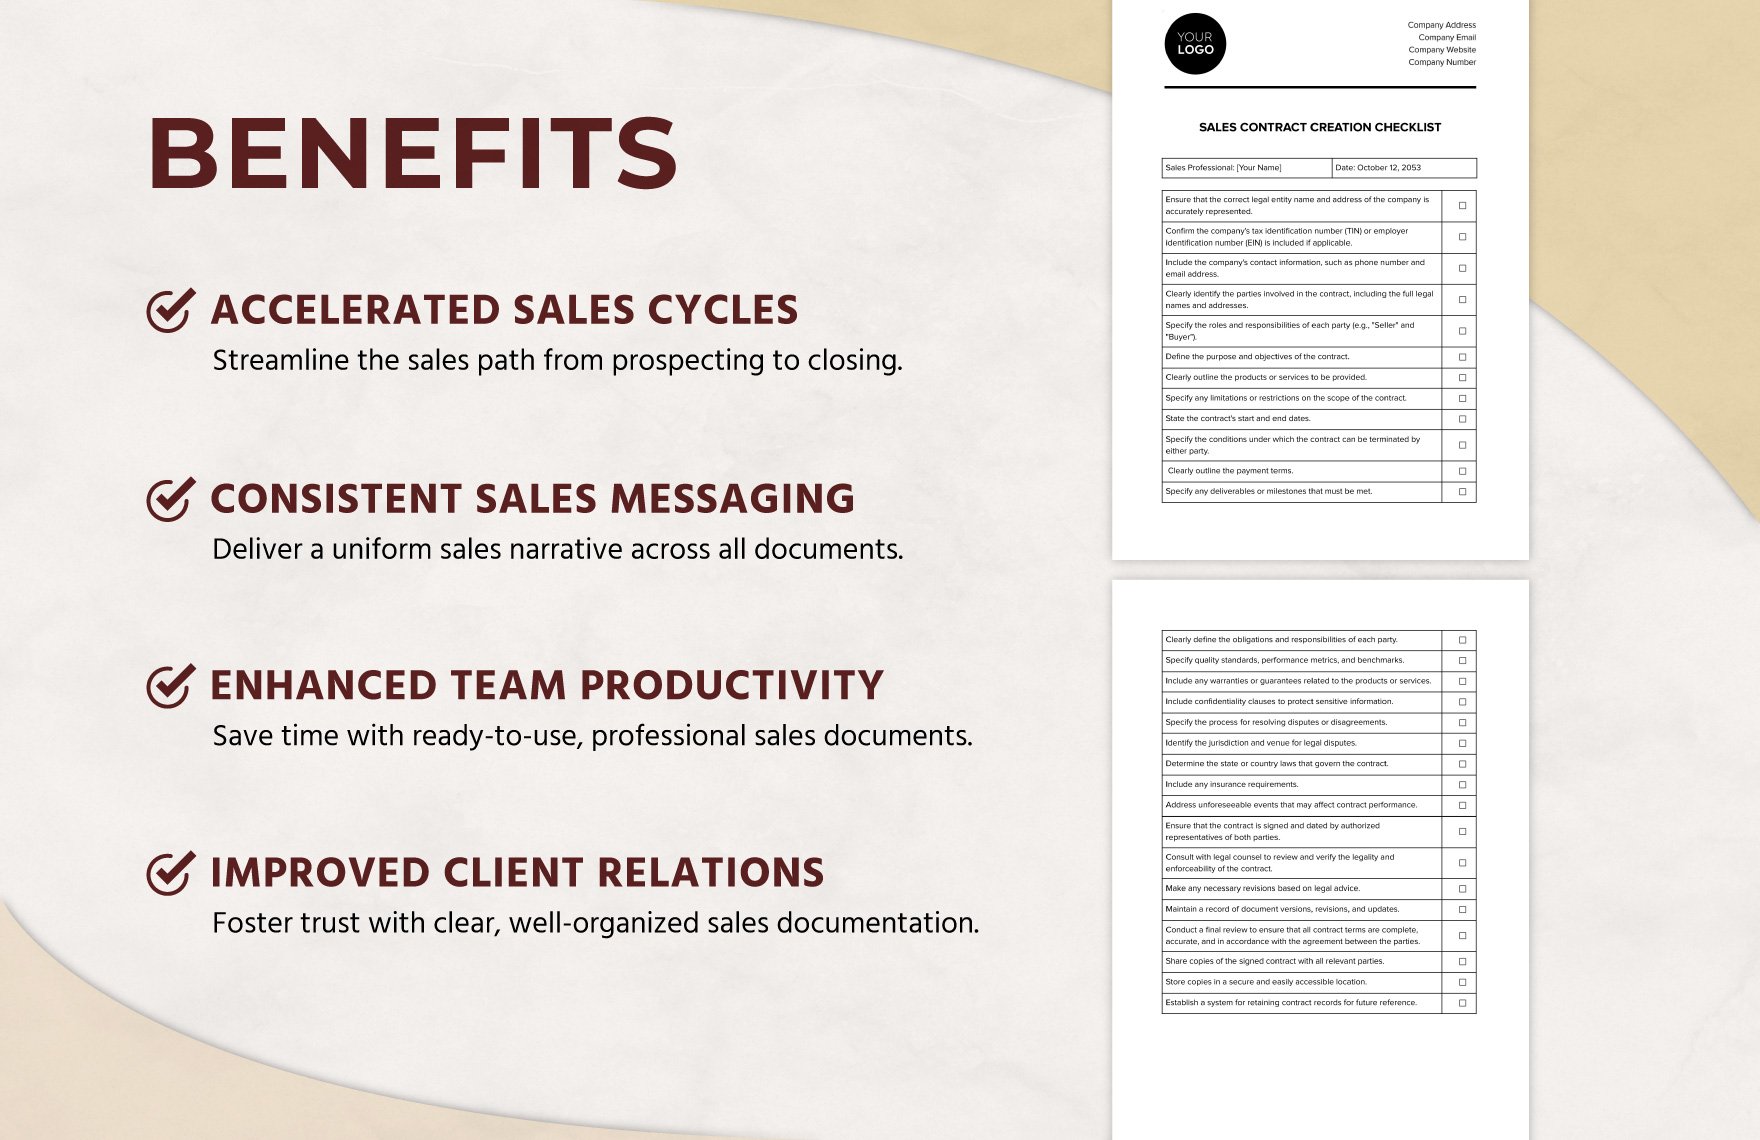 Sales Contract Creation Checklist Template